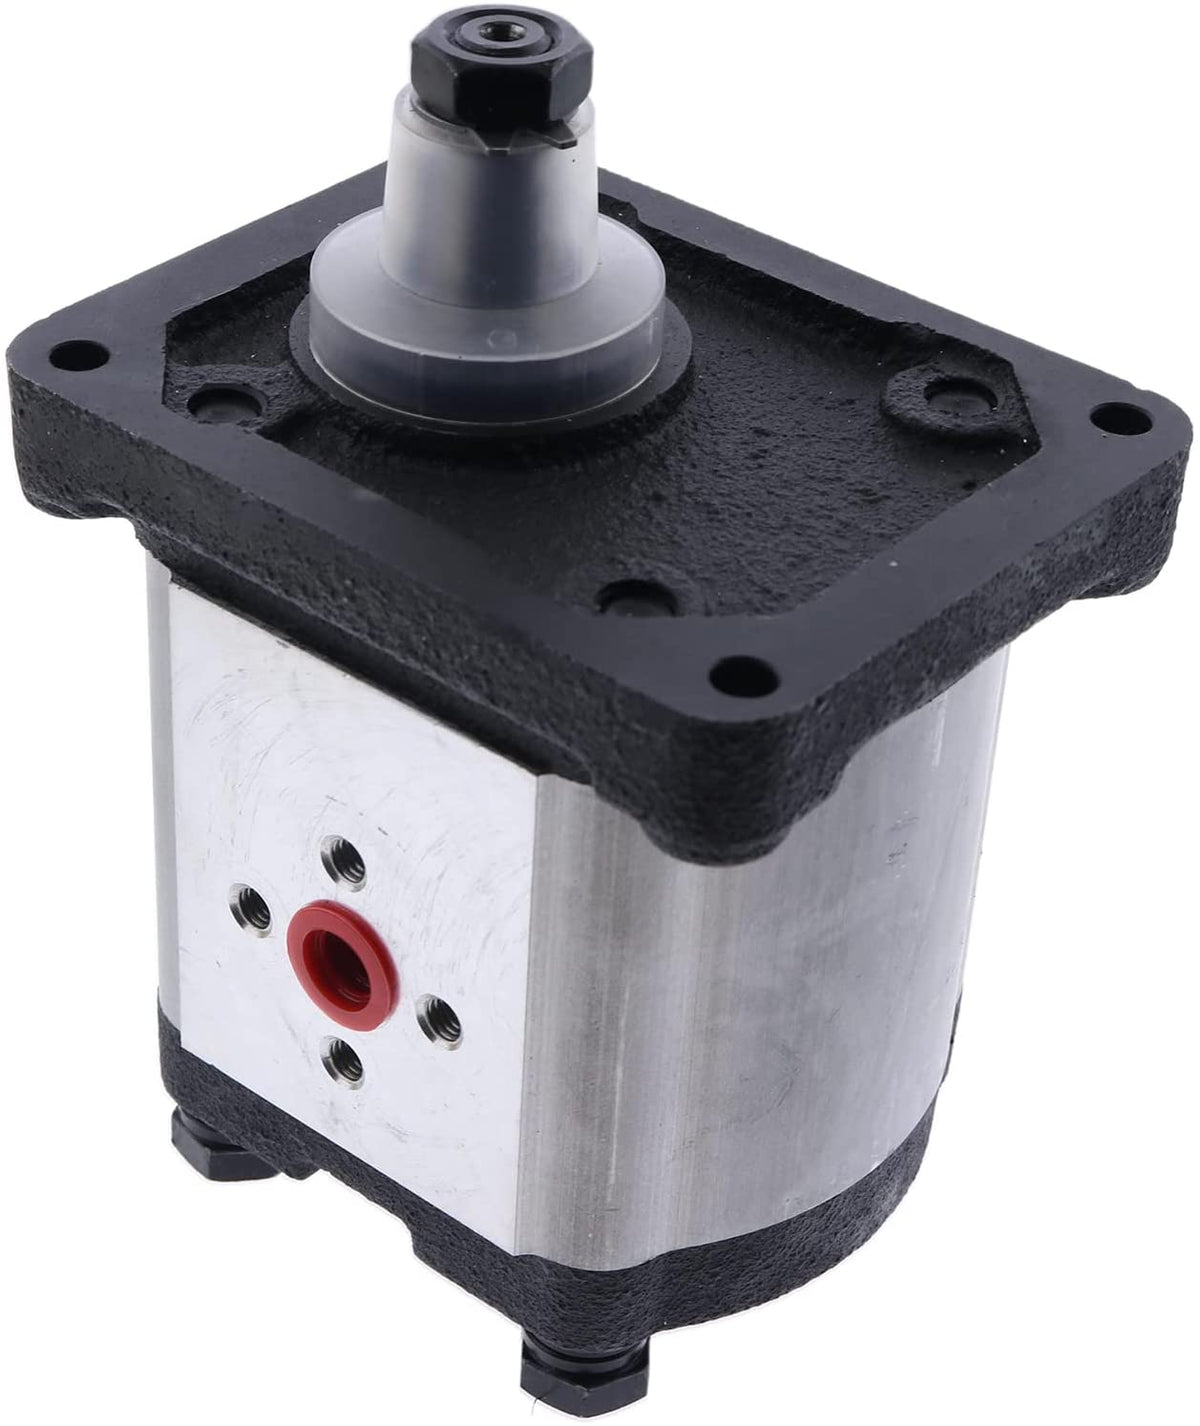 Hydraulic Pump 5129488 5169770 compatible with New Holland Tractor 100-90 110-90 115-90 130-90 140-90 160-90 180-90 55-66 60-66 60-90 65-90 - KUDUPARTS